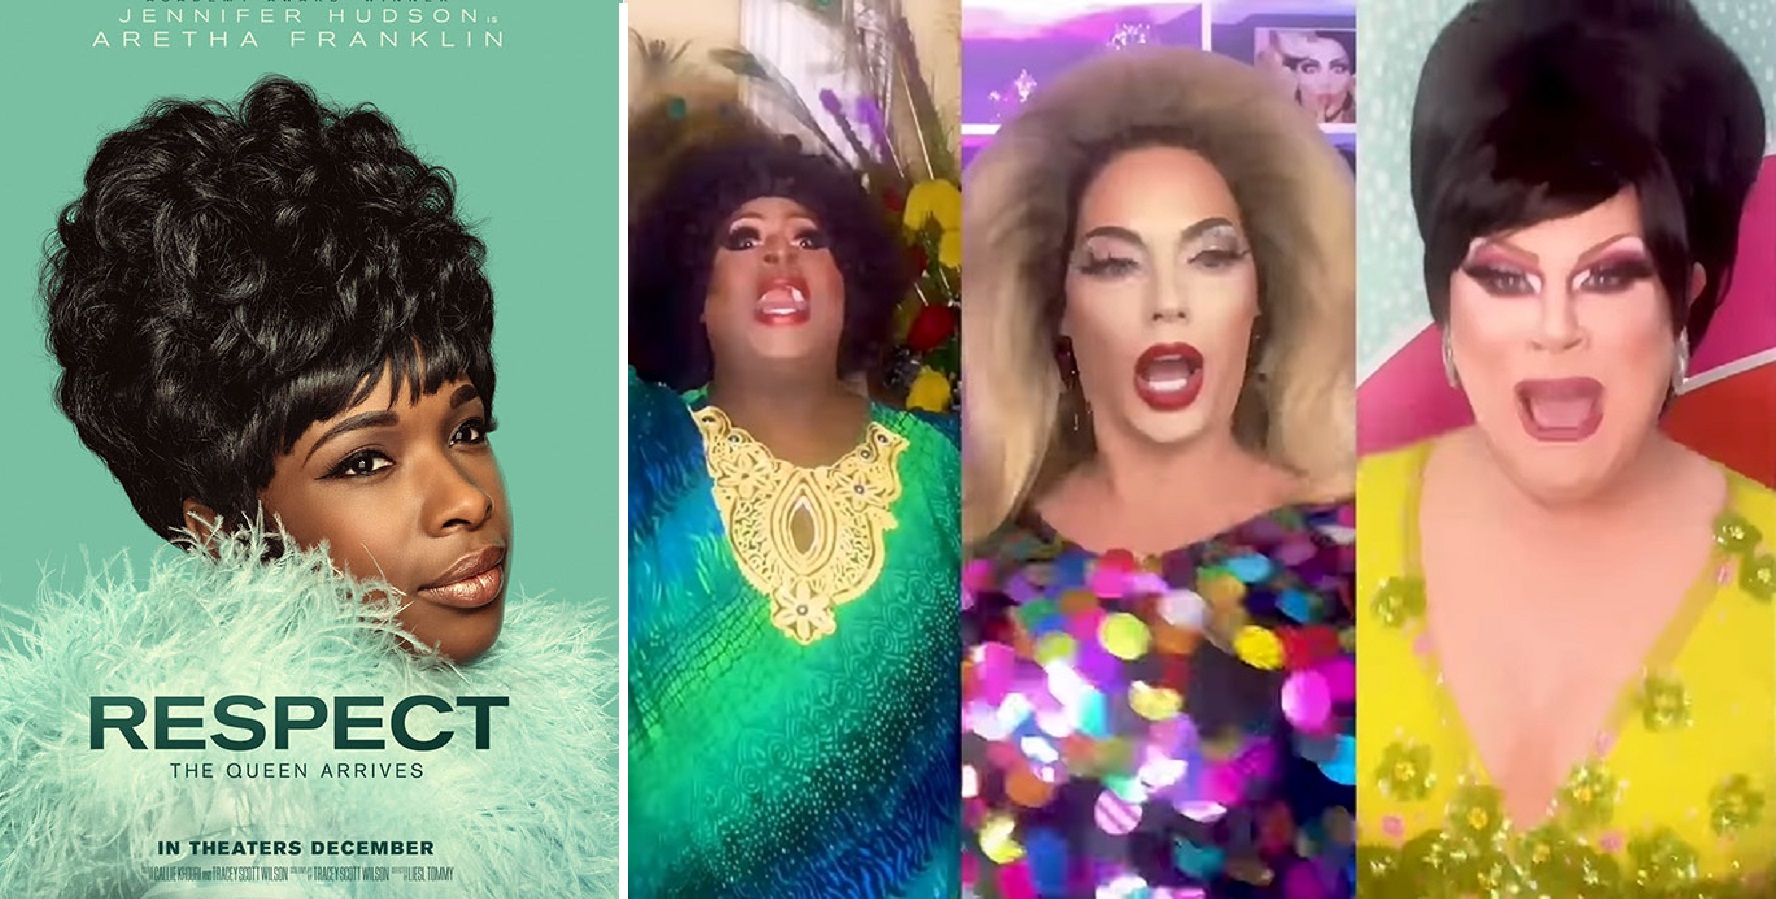 Watch: Drag Queens React To Aretha Franklin Biopic ‘Respect’ Starring Jennifer Hudson